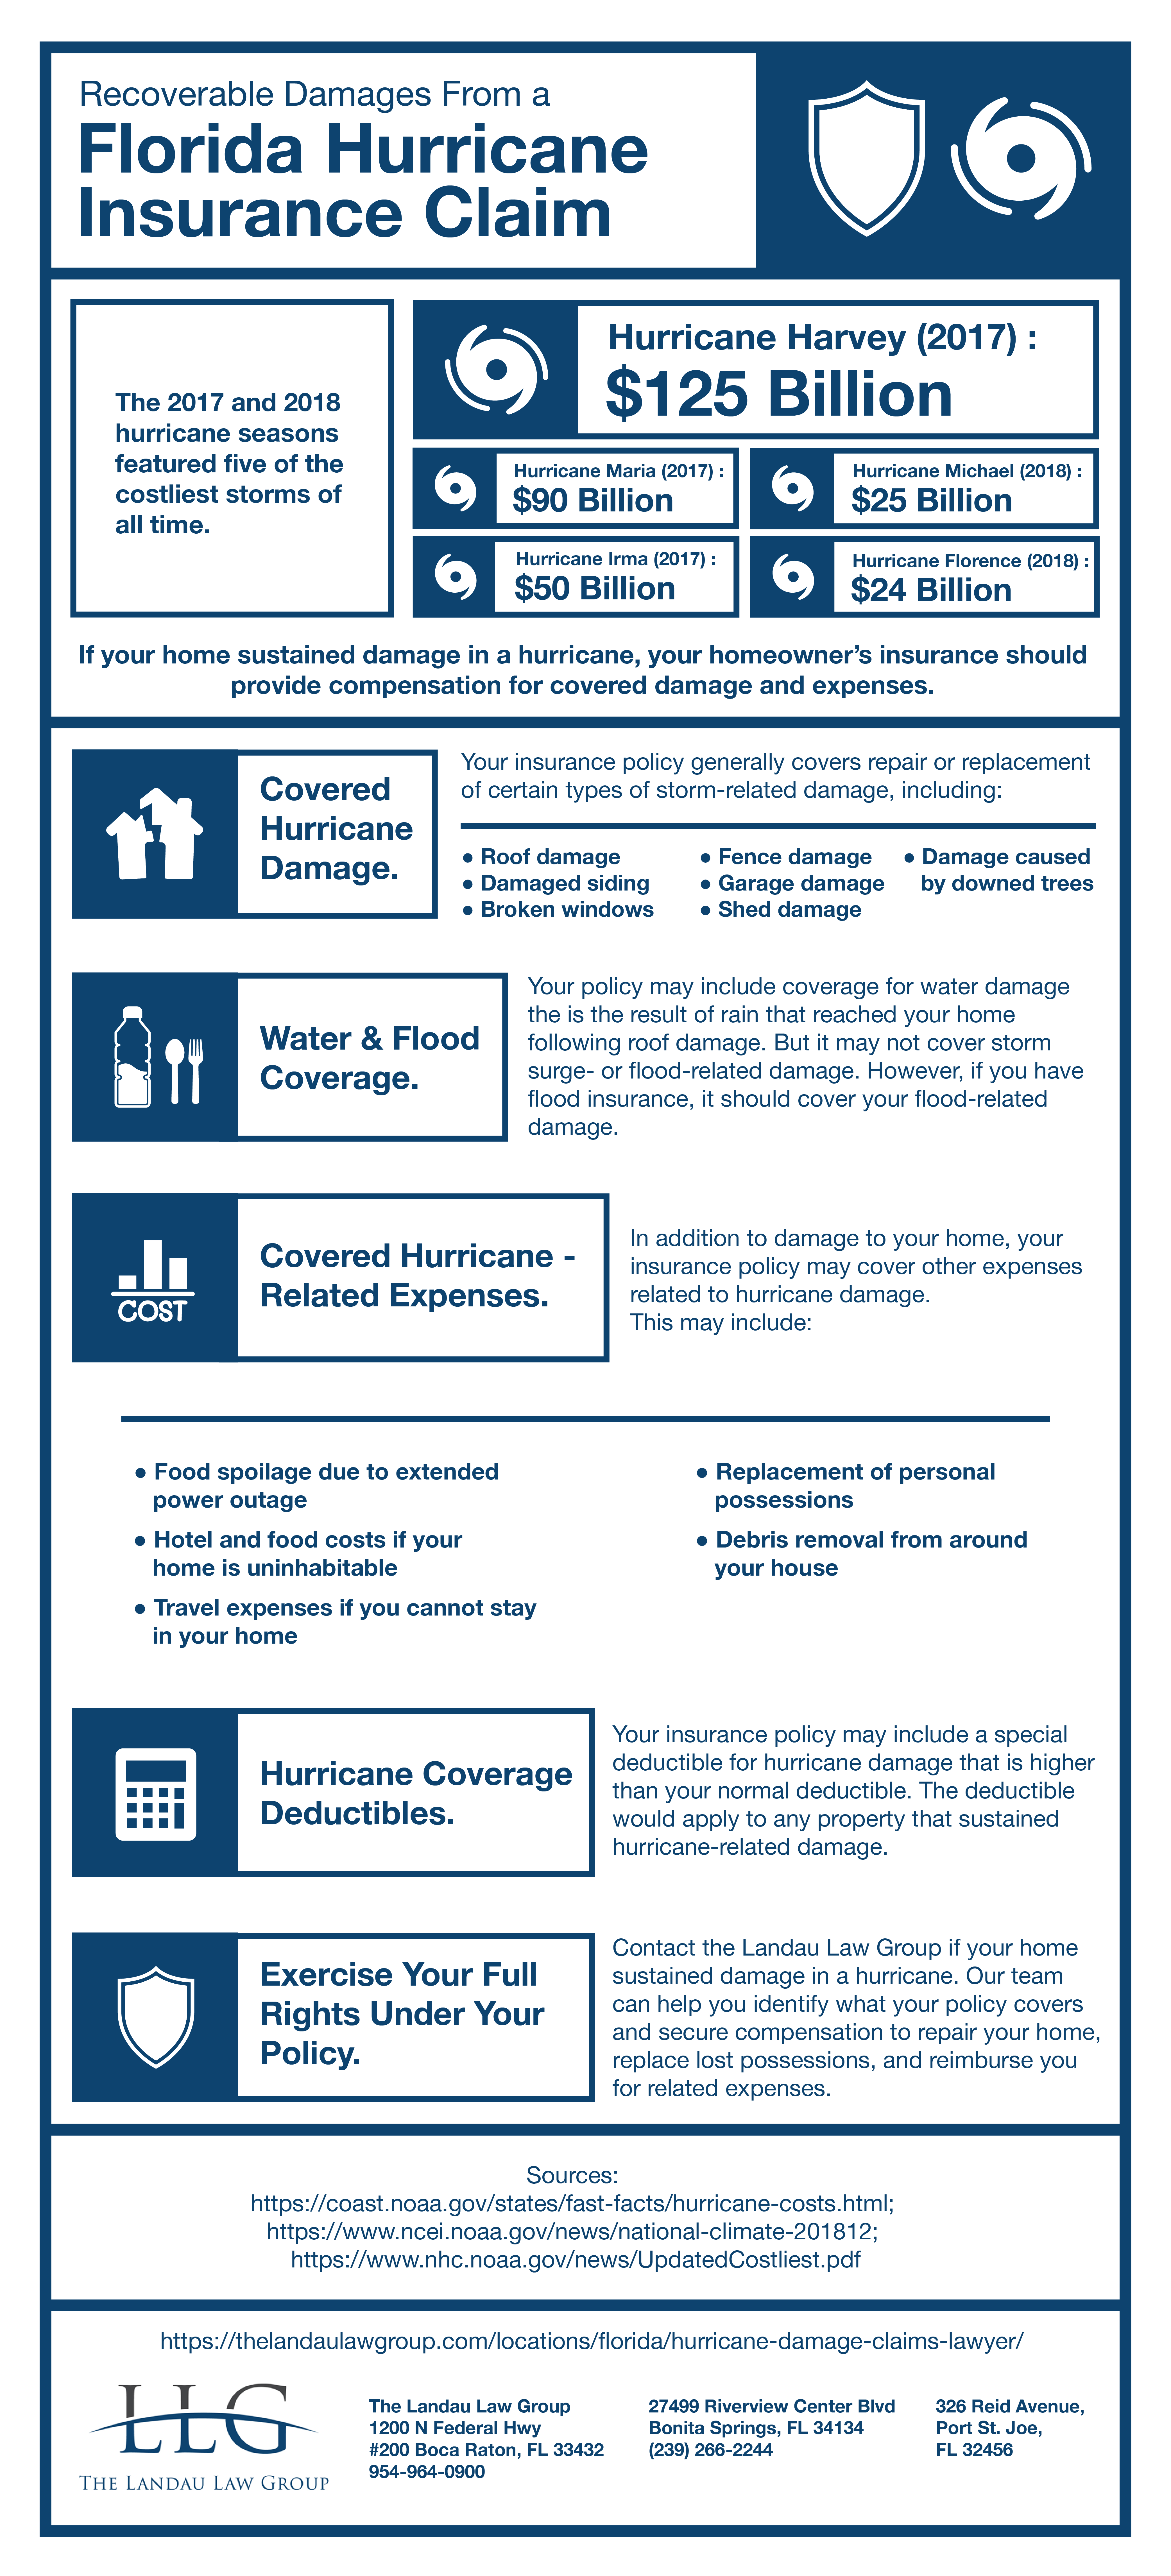 Recoverable Damages From a Florida Hurricane Insurance Claim